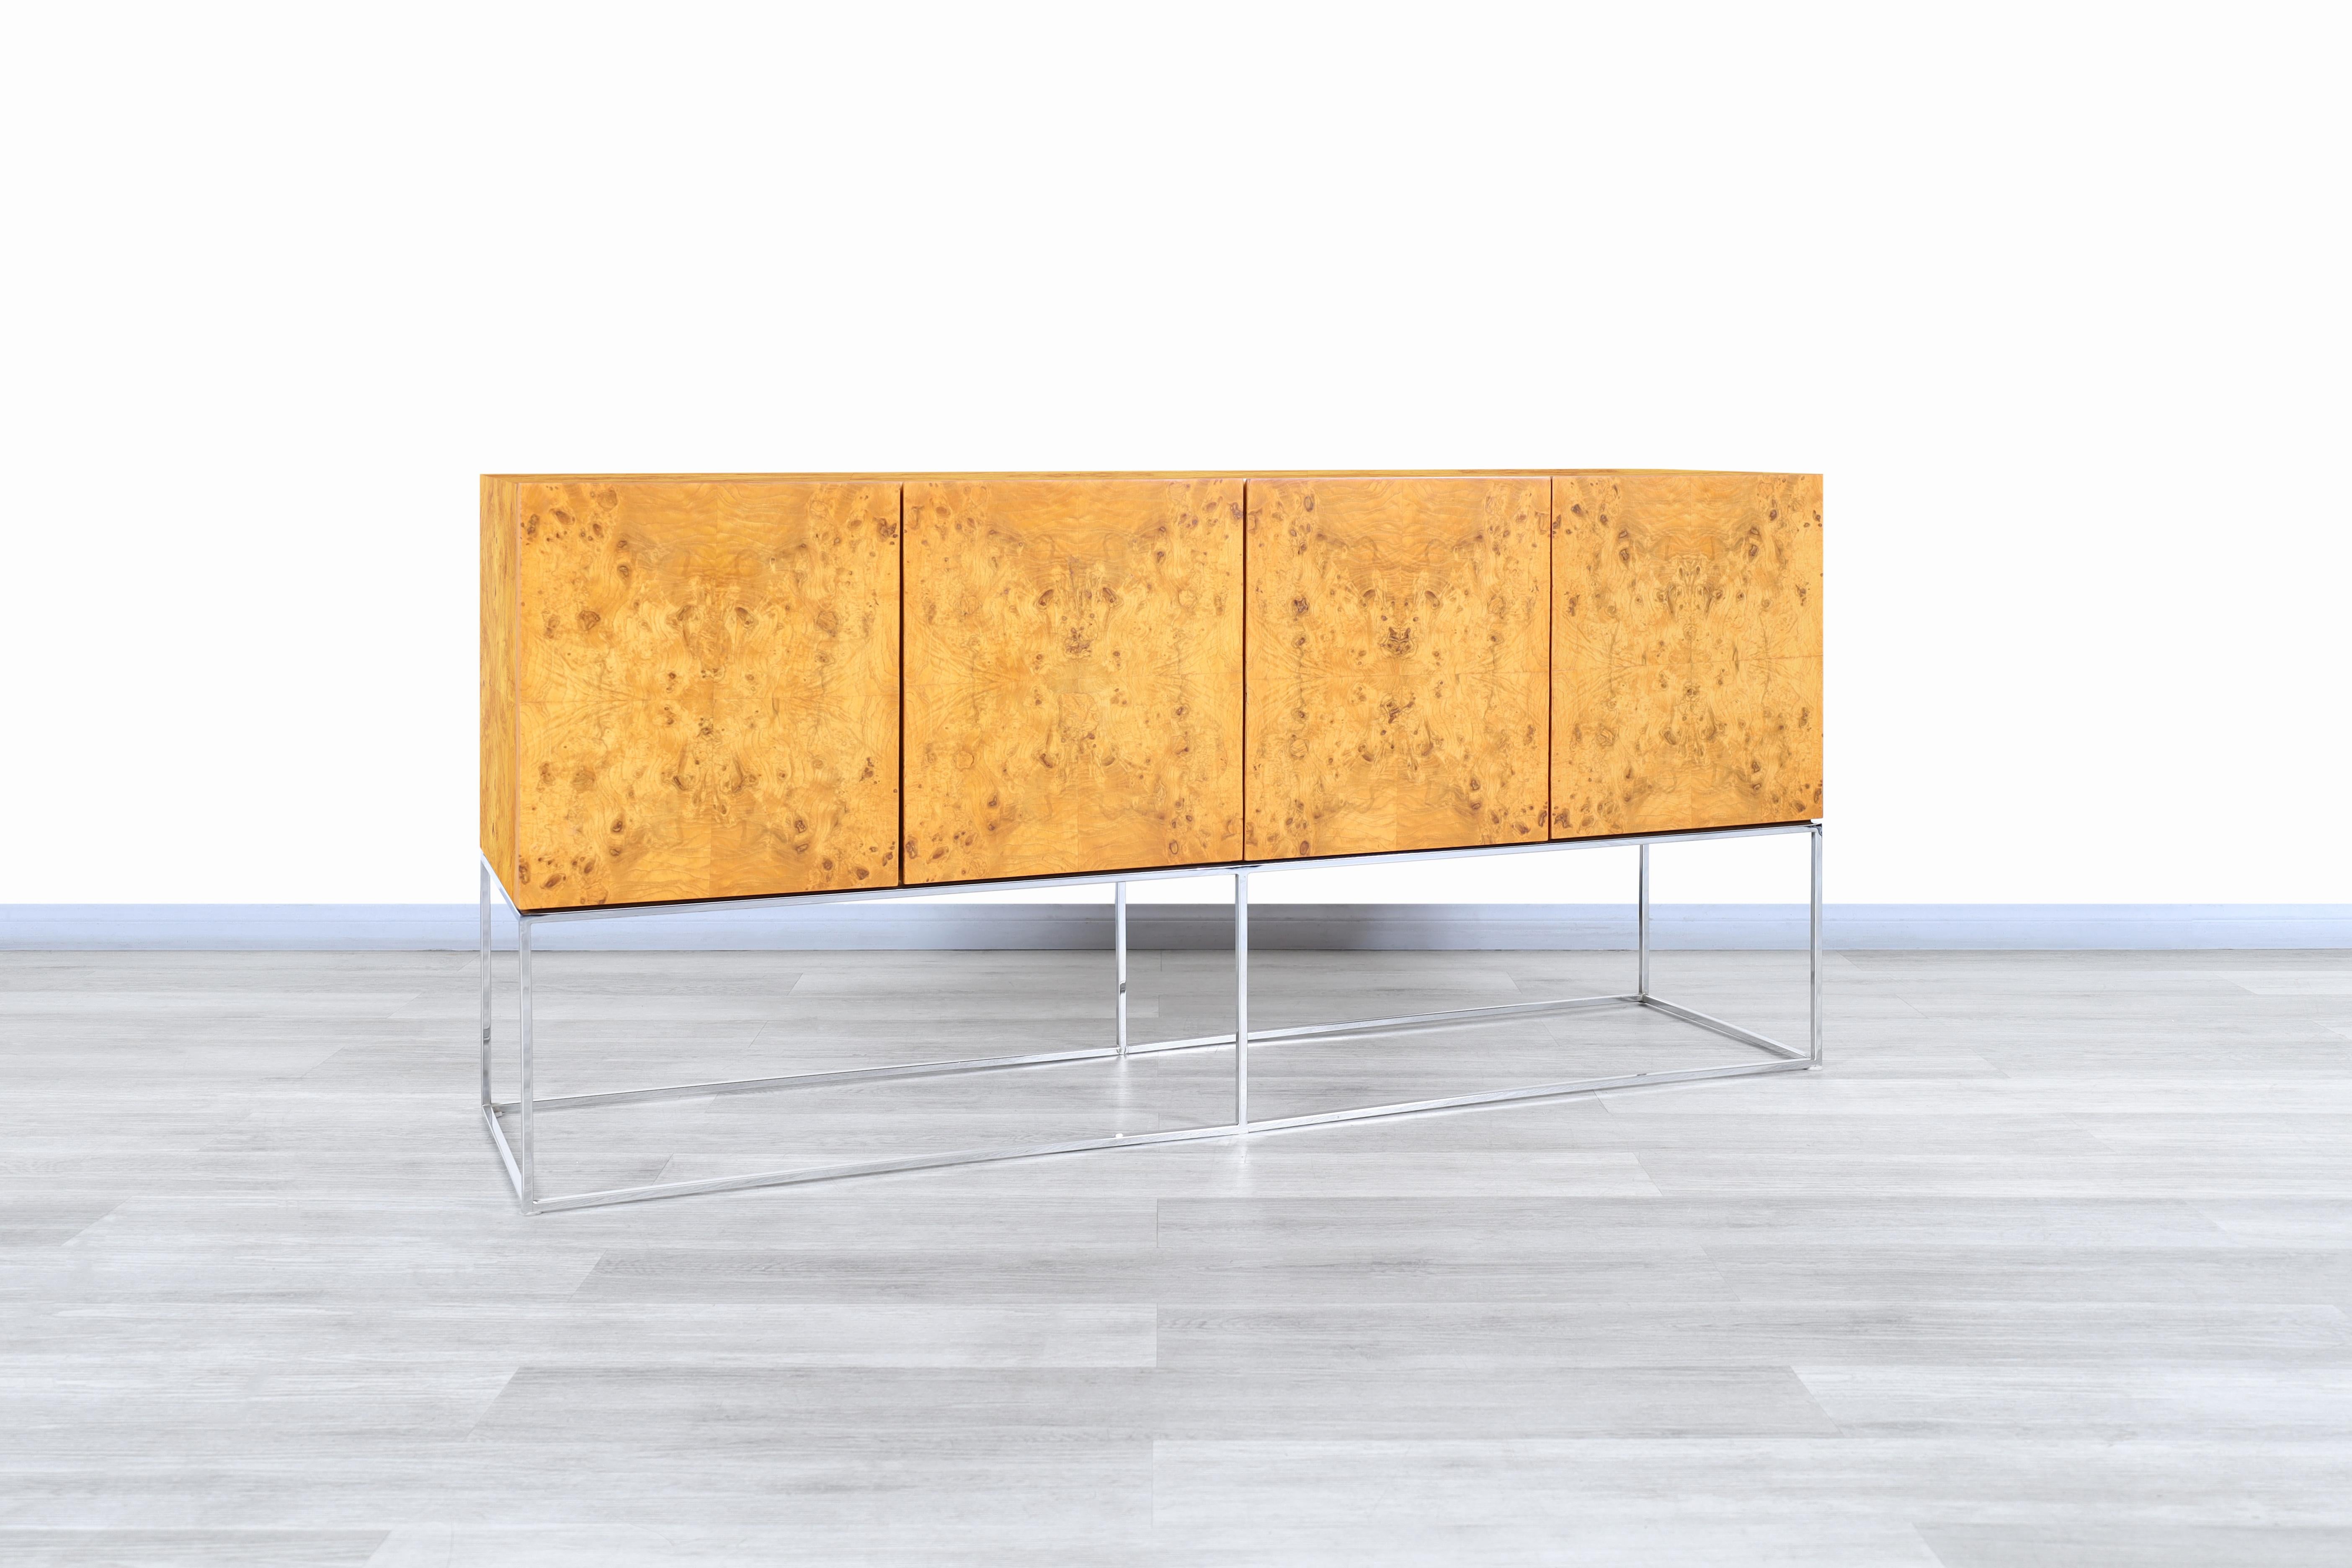 Beautiful vintage burl wood and chrome credenza by Milo Baughman for Thayer Coggin in the United States, circa 1970s. This exceptional credenza stands out for its fine finishes, showing elegant and detailed figures at each angle. A completely smooth